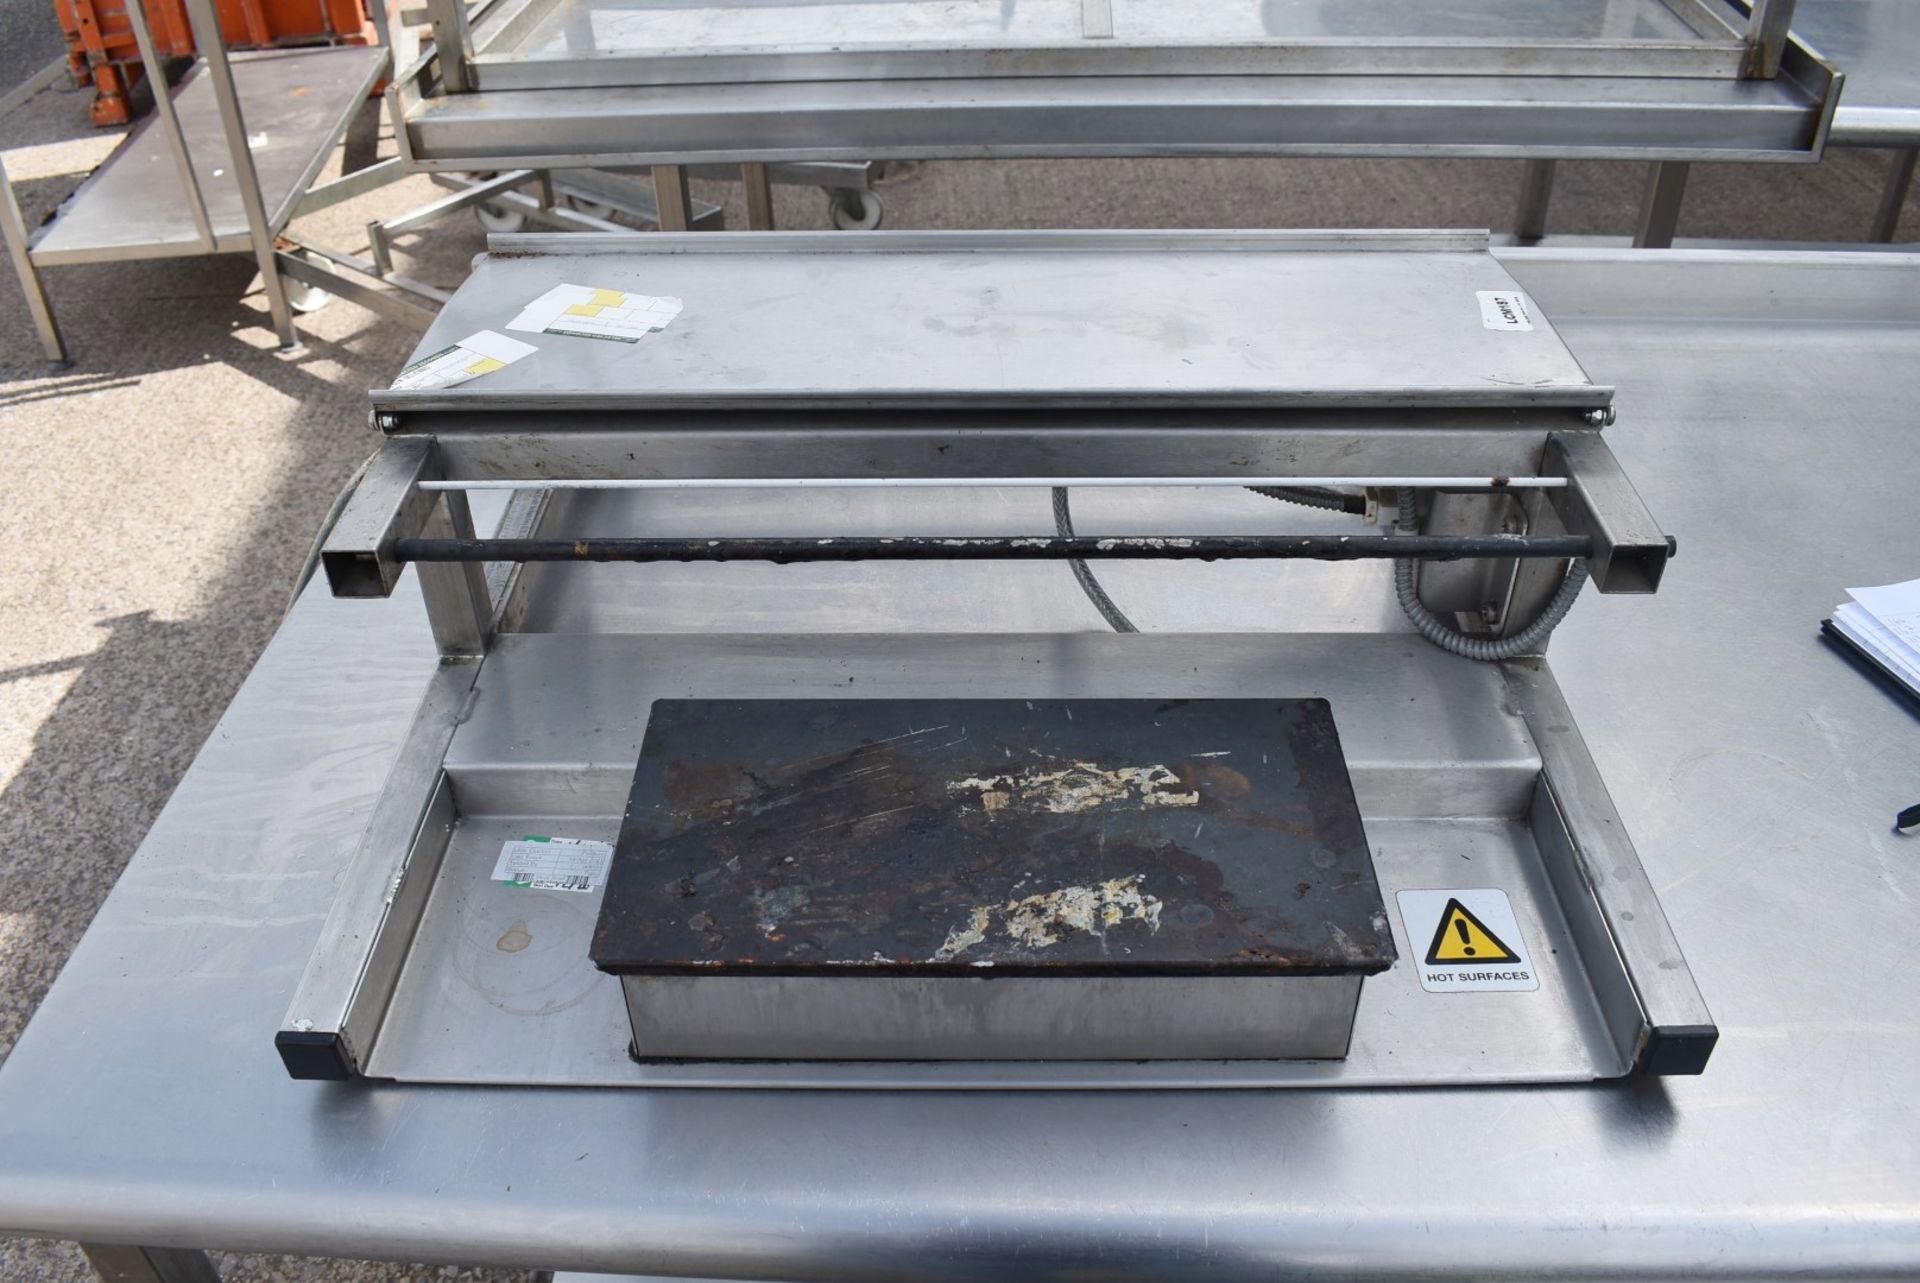 1 x Countertop Food Tray Wrapper Unit For Heat Sealed Wrapping - 56cm Wide - 240v - Recently Removed - Image 2 of 7